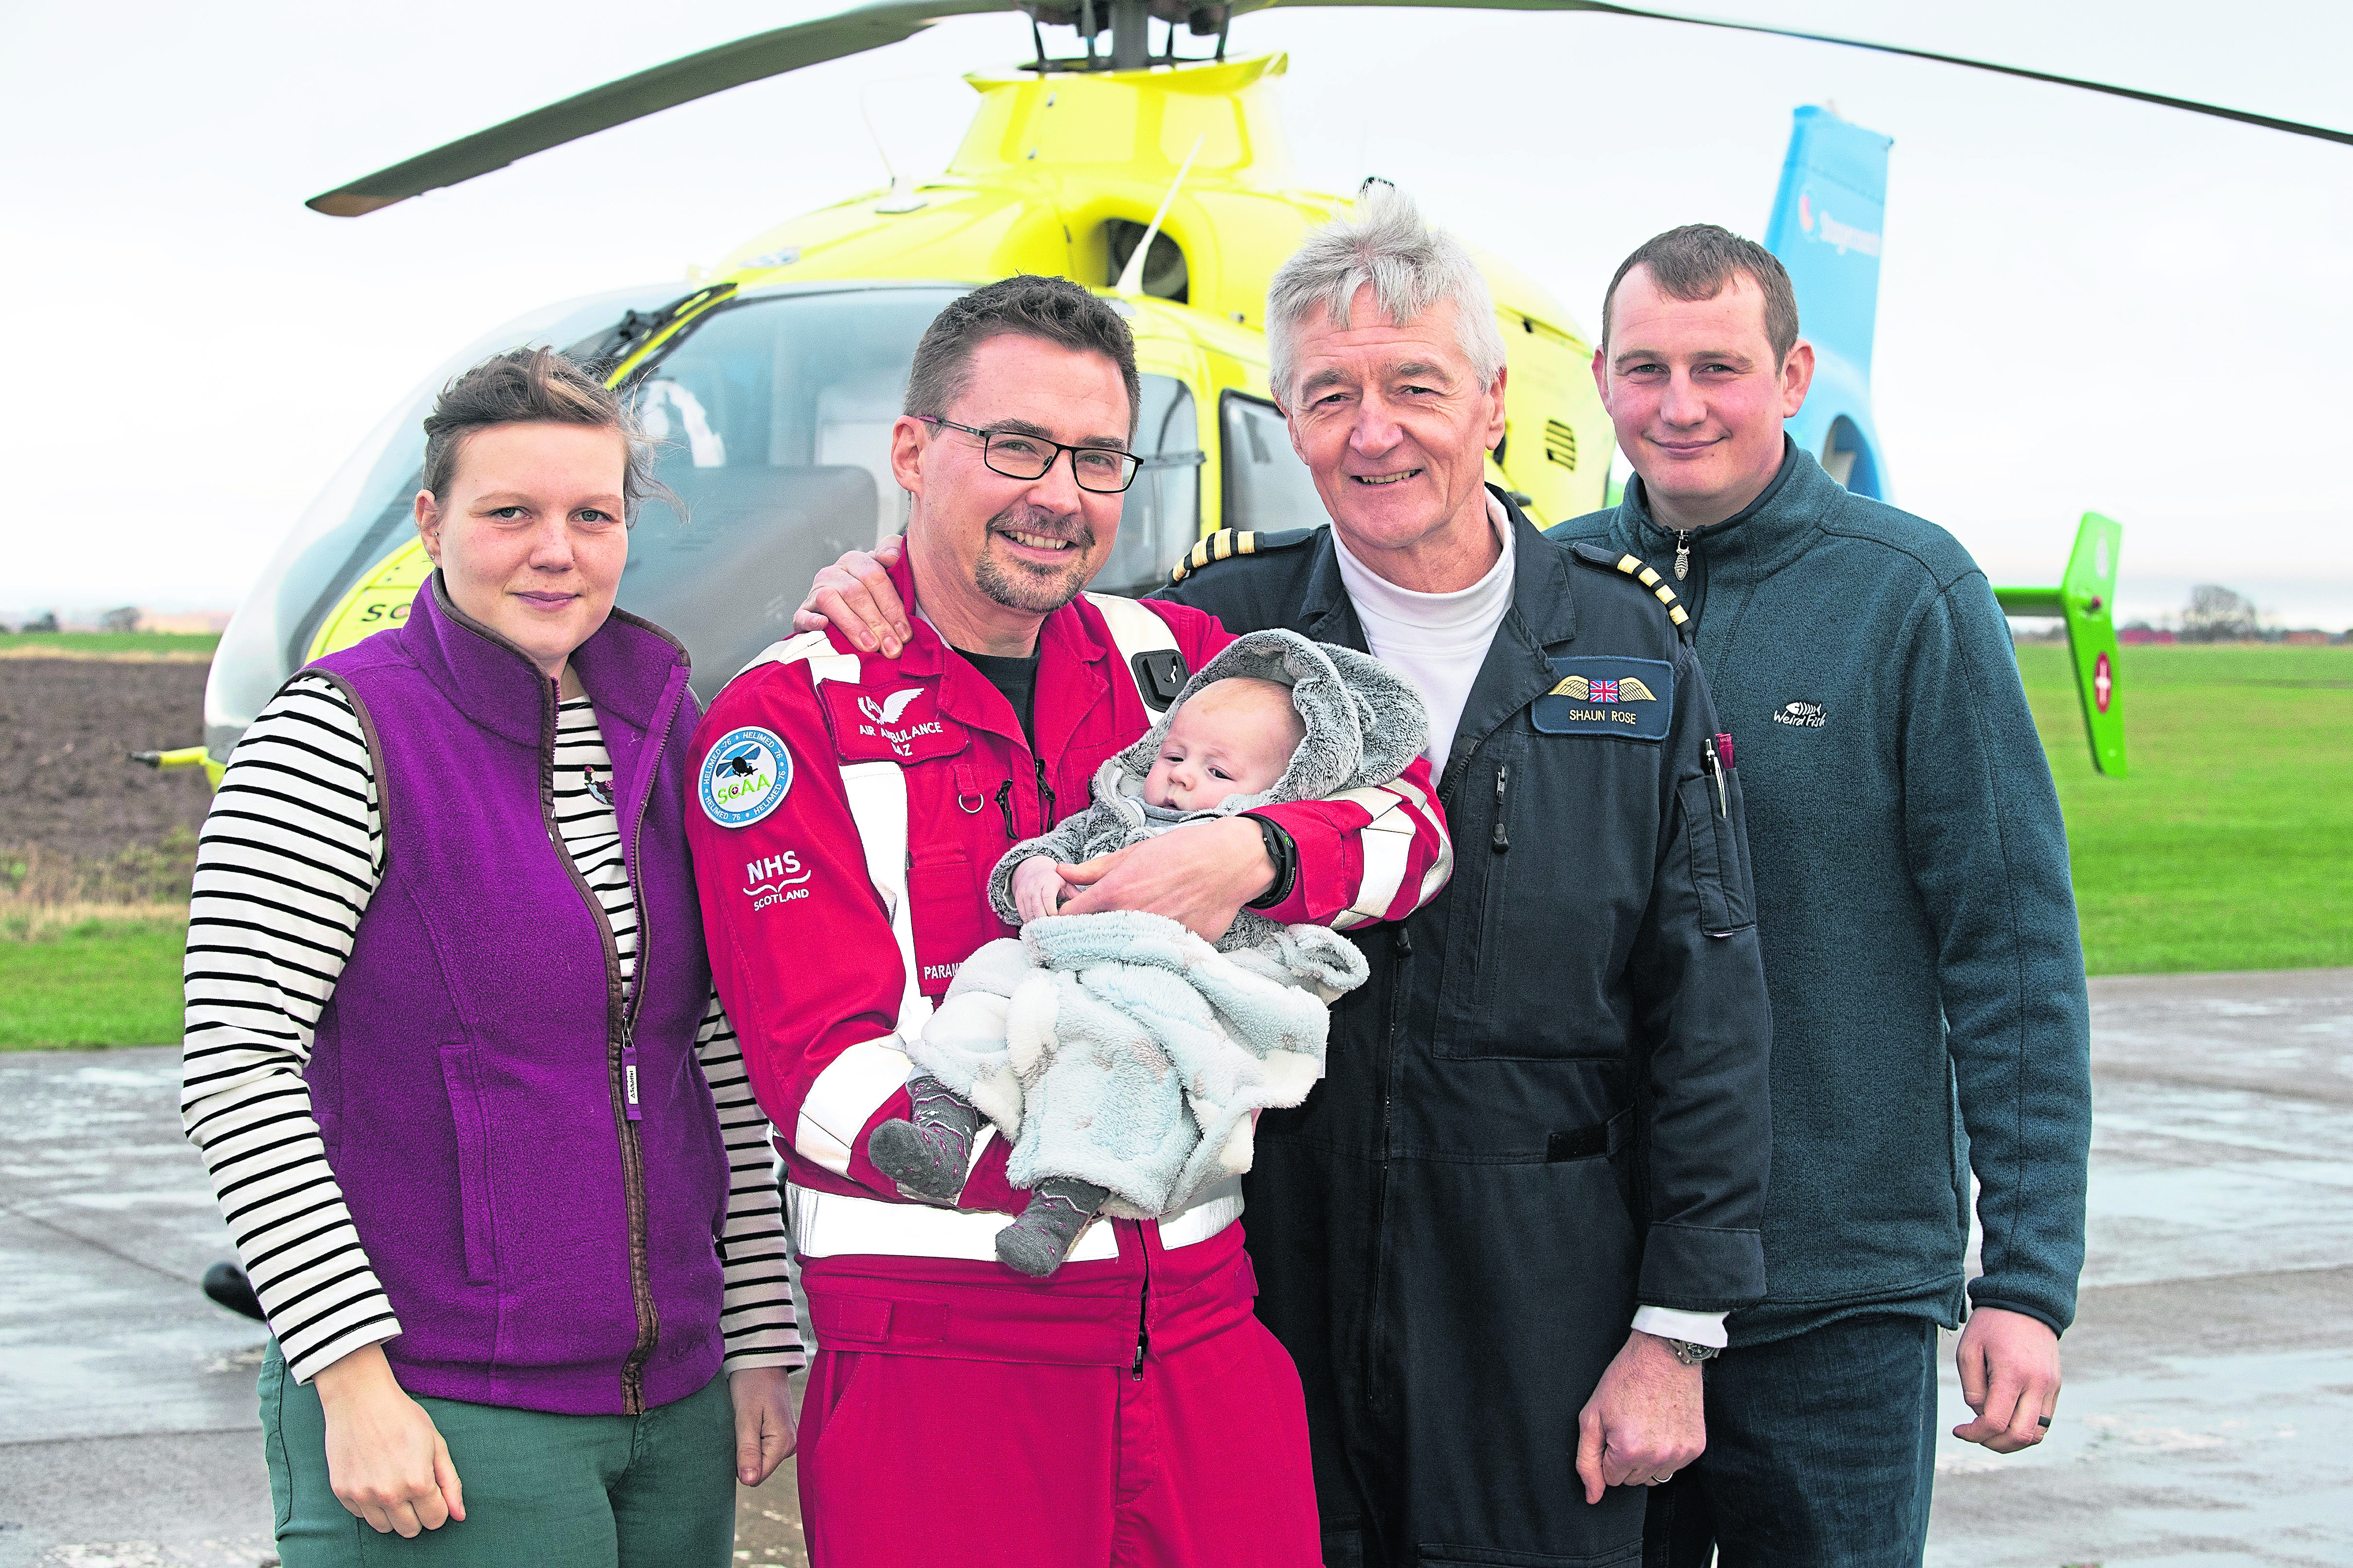 Three-month-old baby James Davidson from Glen Esk in Angus who had been savaged by a family dog pictured on a visit to Scotland's Charity Air Ambulance to say thank you to the crew who helped to save his life. Pictured from left, Morven Davidson (Mum), Paramedic Darren O'Brien holding baby James, Pilot Captain Shaun Rose and Derek Davidson (Dad).
Picture by Graeme Hart